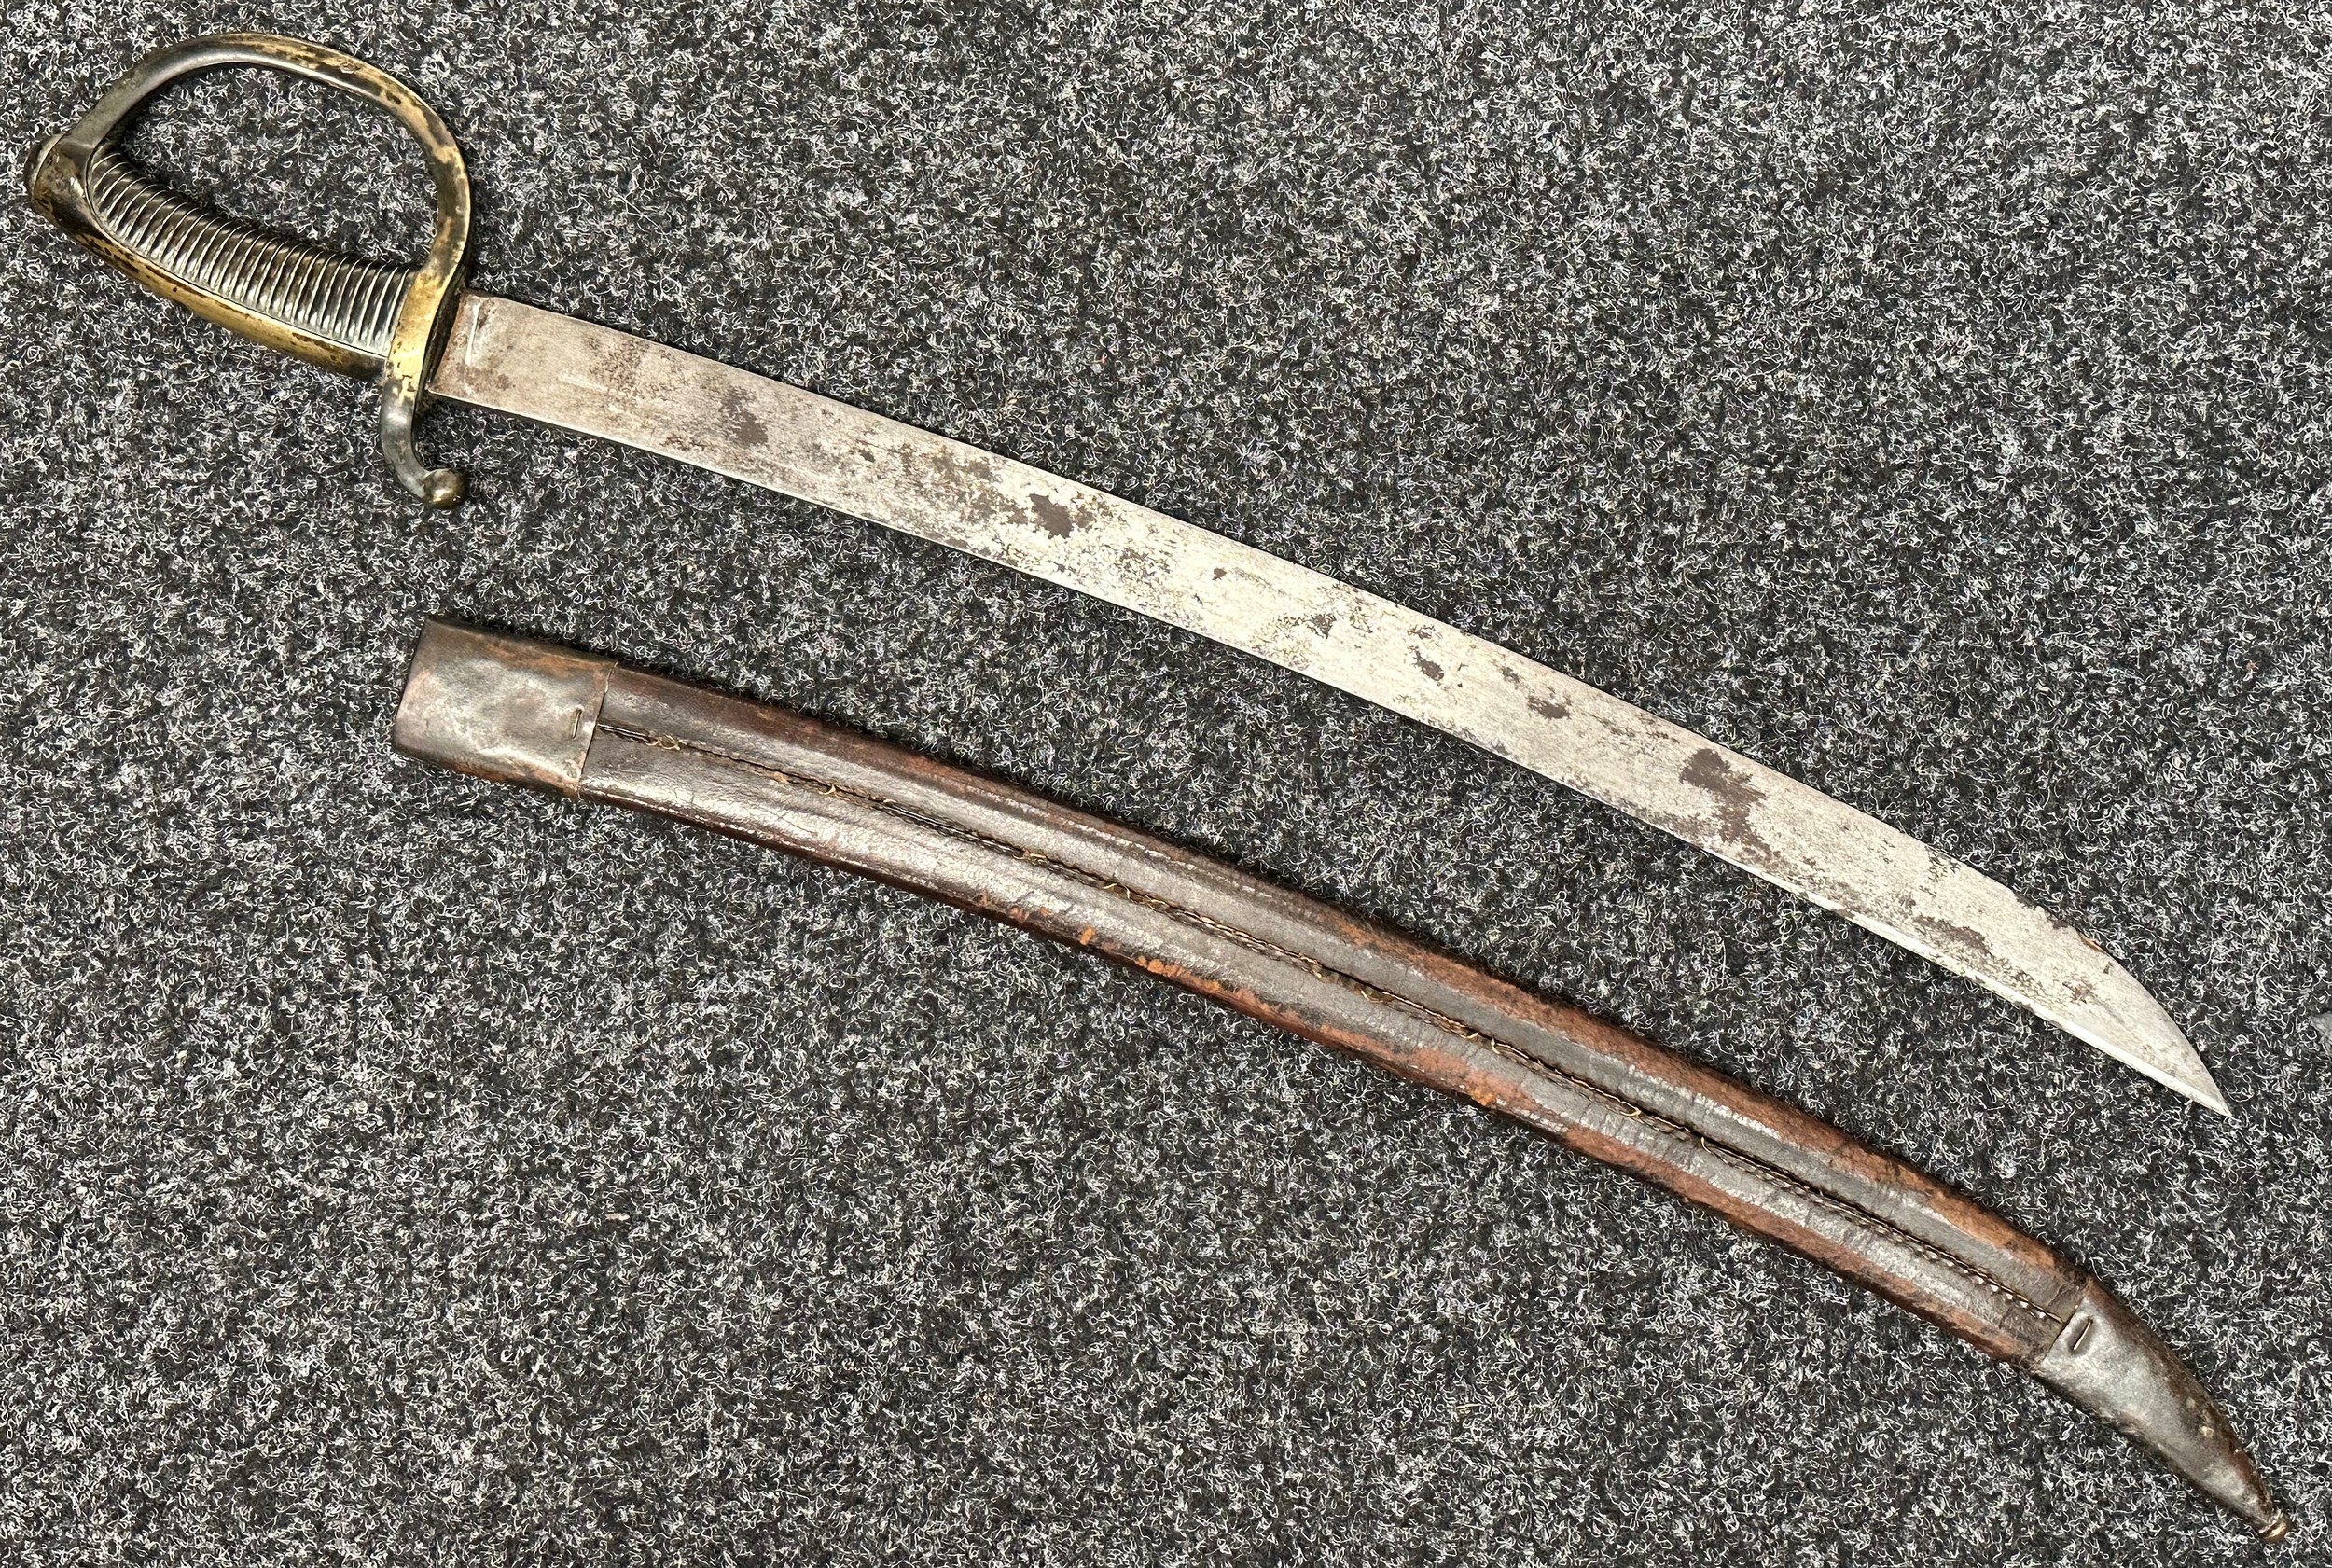 French Model 1804 Bording Cutlass with curved single edged blade 595mm in length, maker marked "